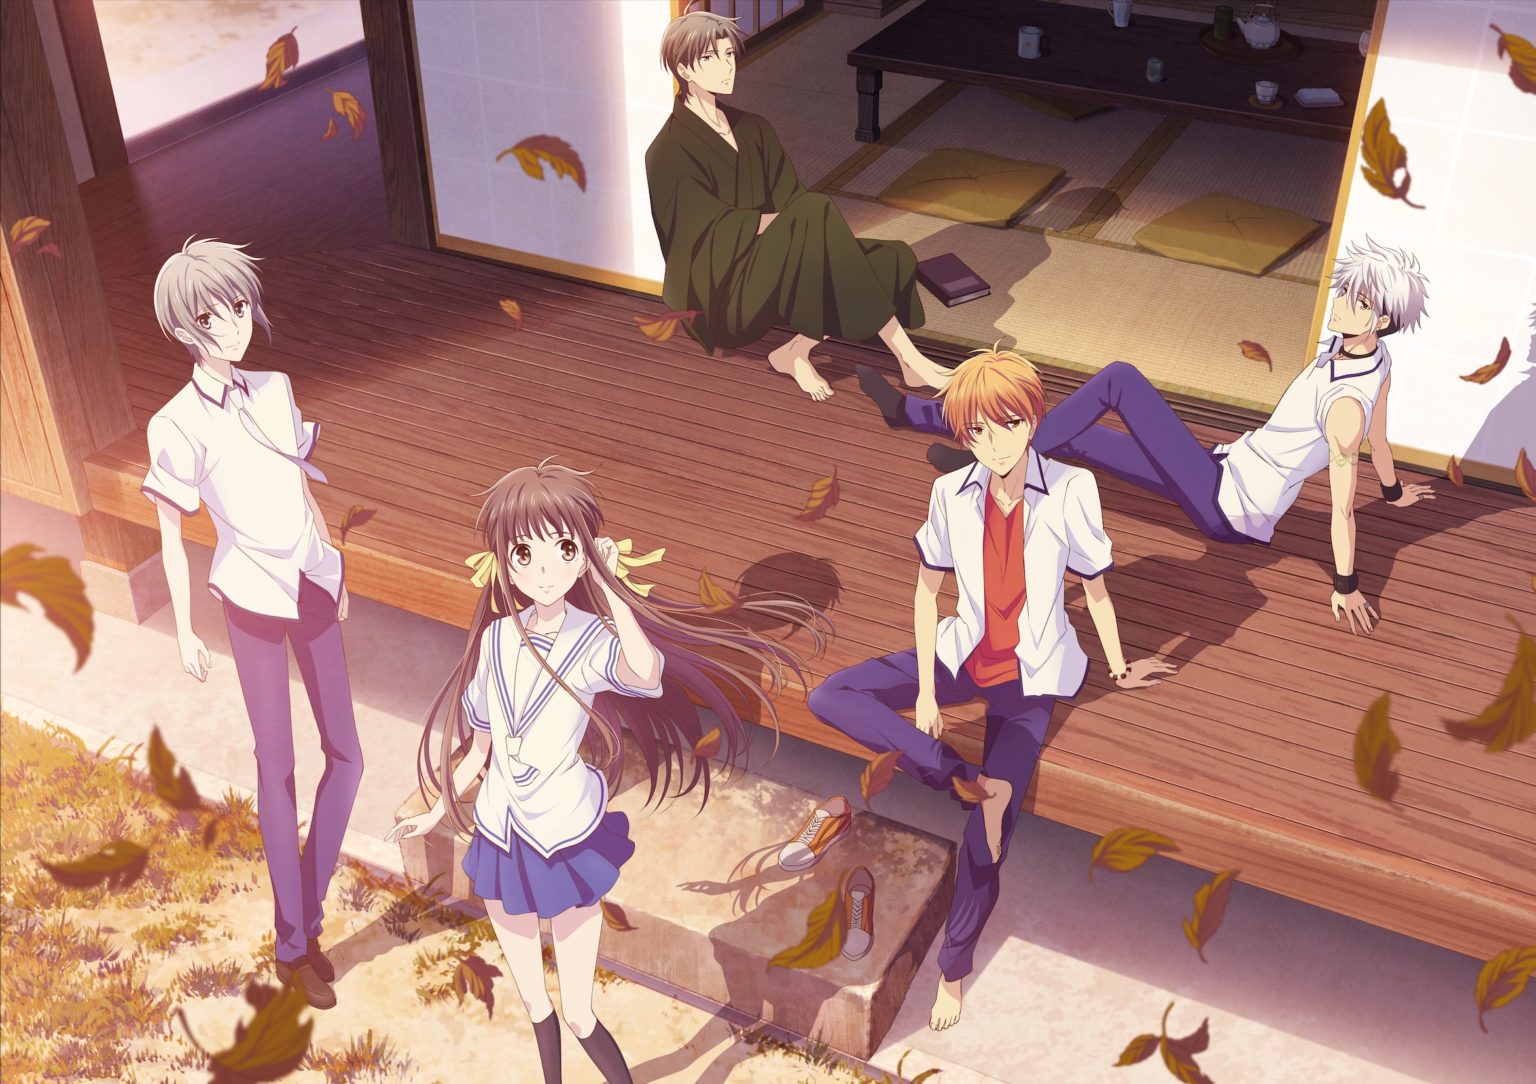 Why the Fruits Basket Reboot Is Better Than the Original